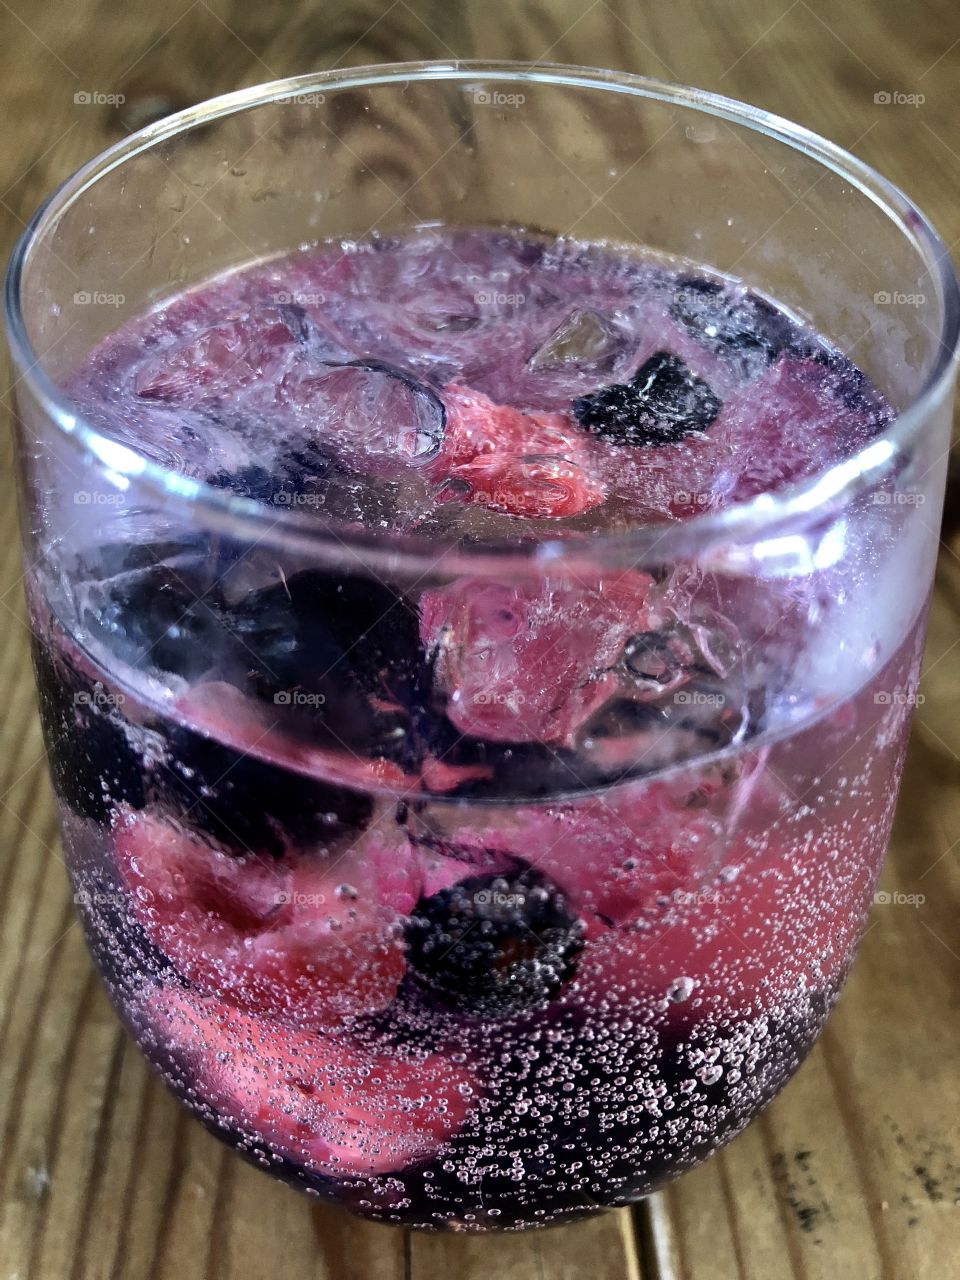 Refreshing raspberries and blueberries drink on hot summer day. 